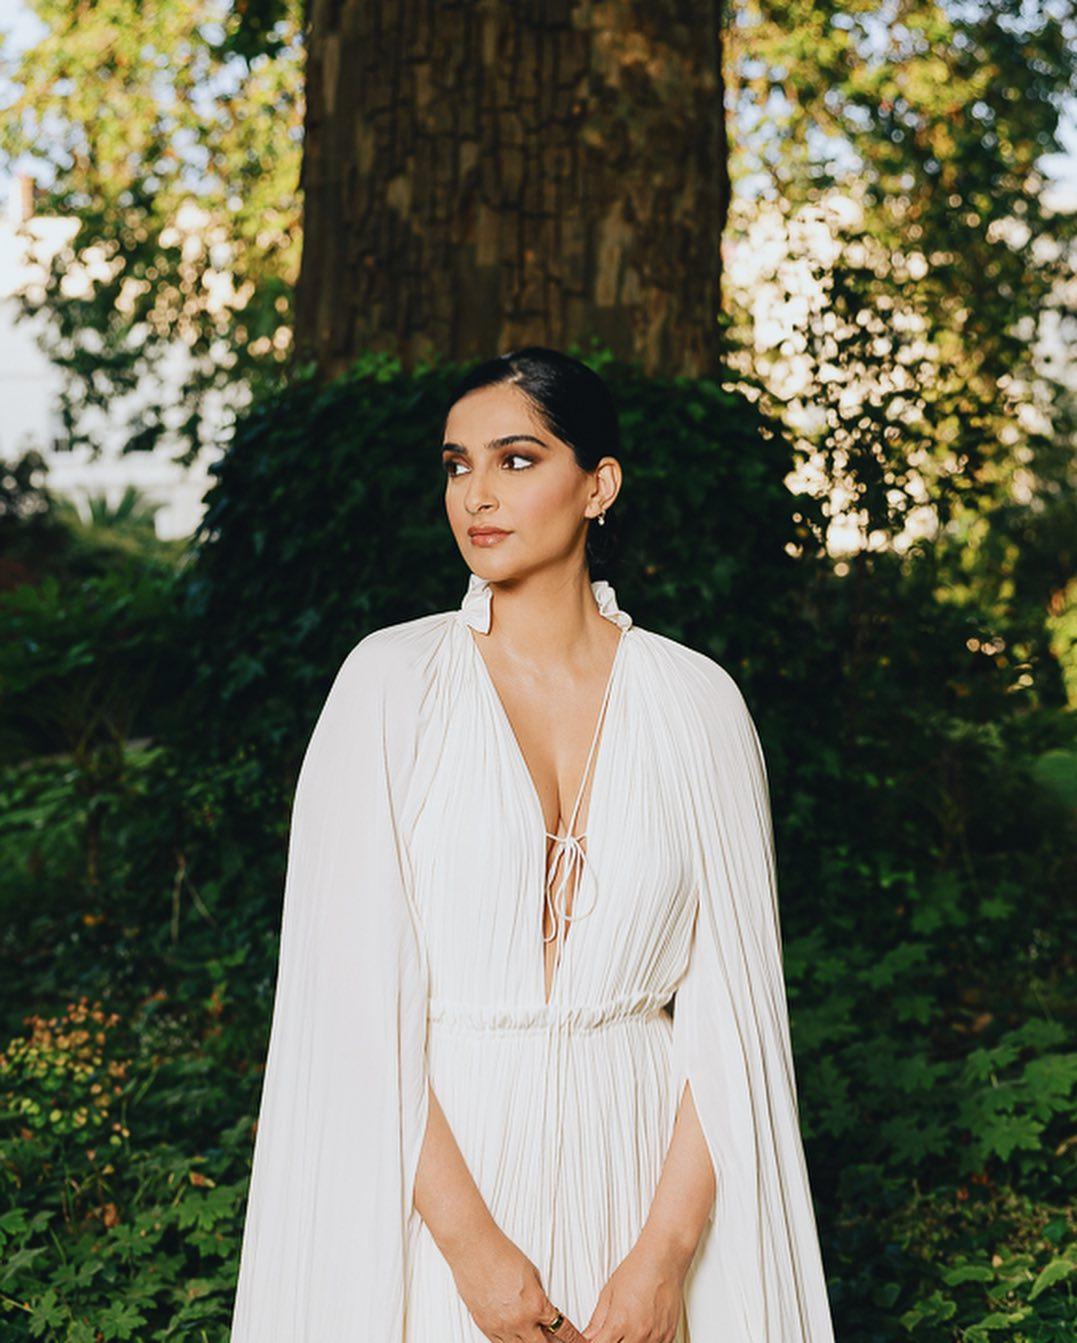 Sonam Kapoor looked like a vision in this all-white ensemble